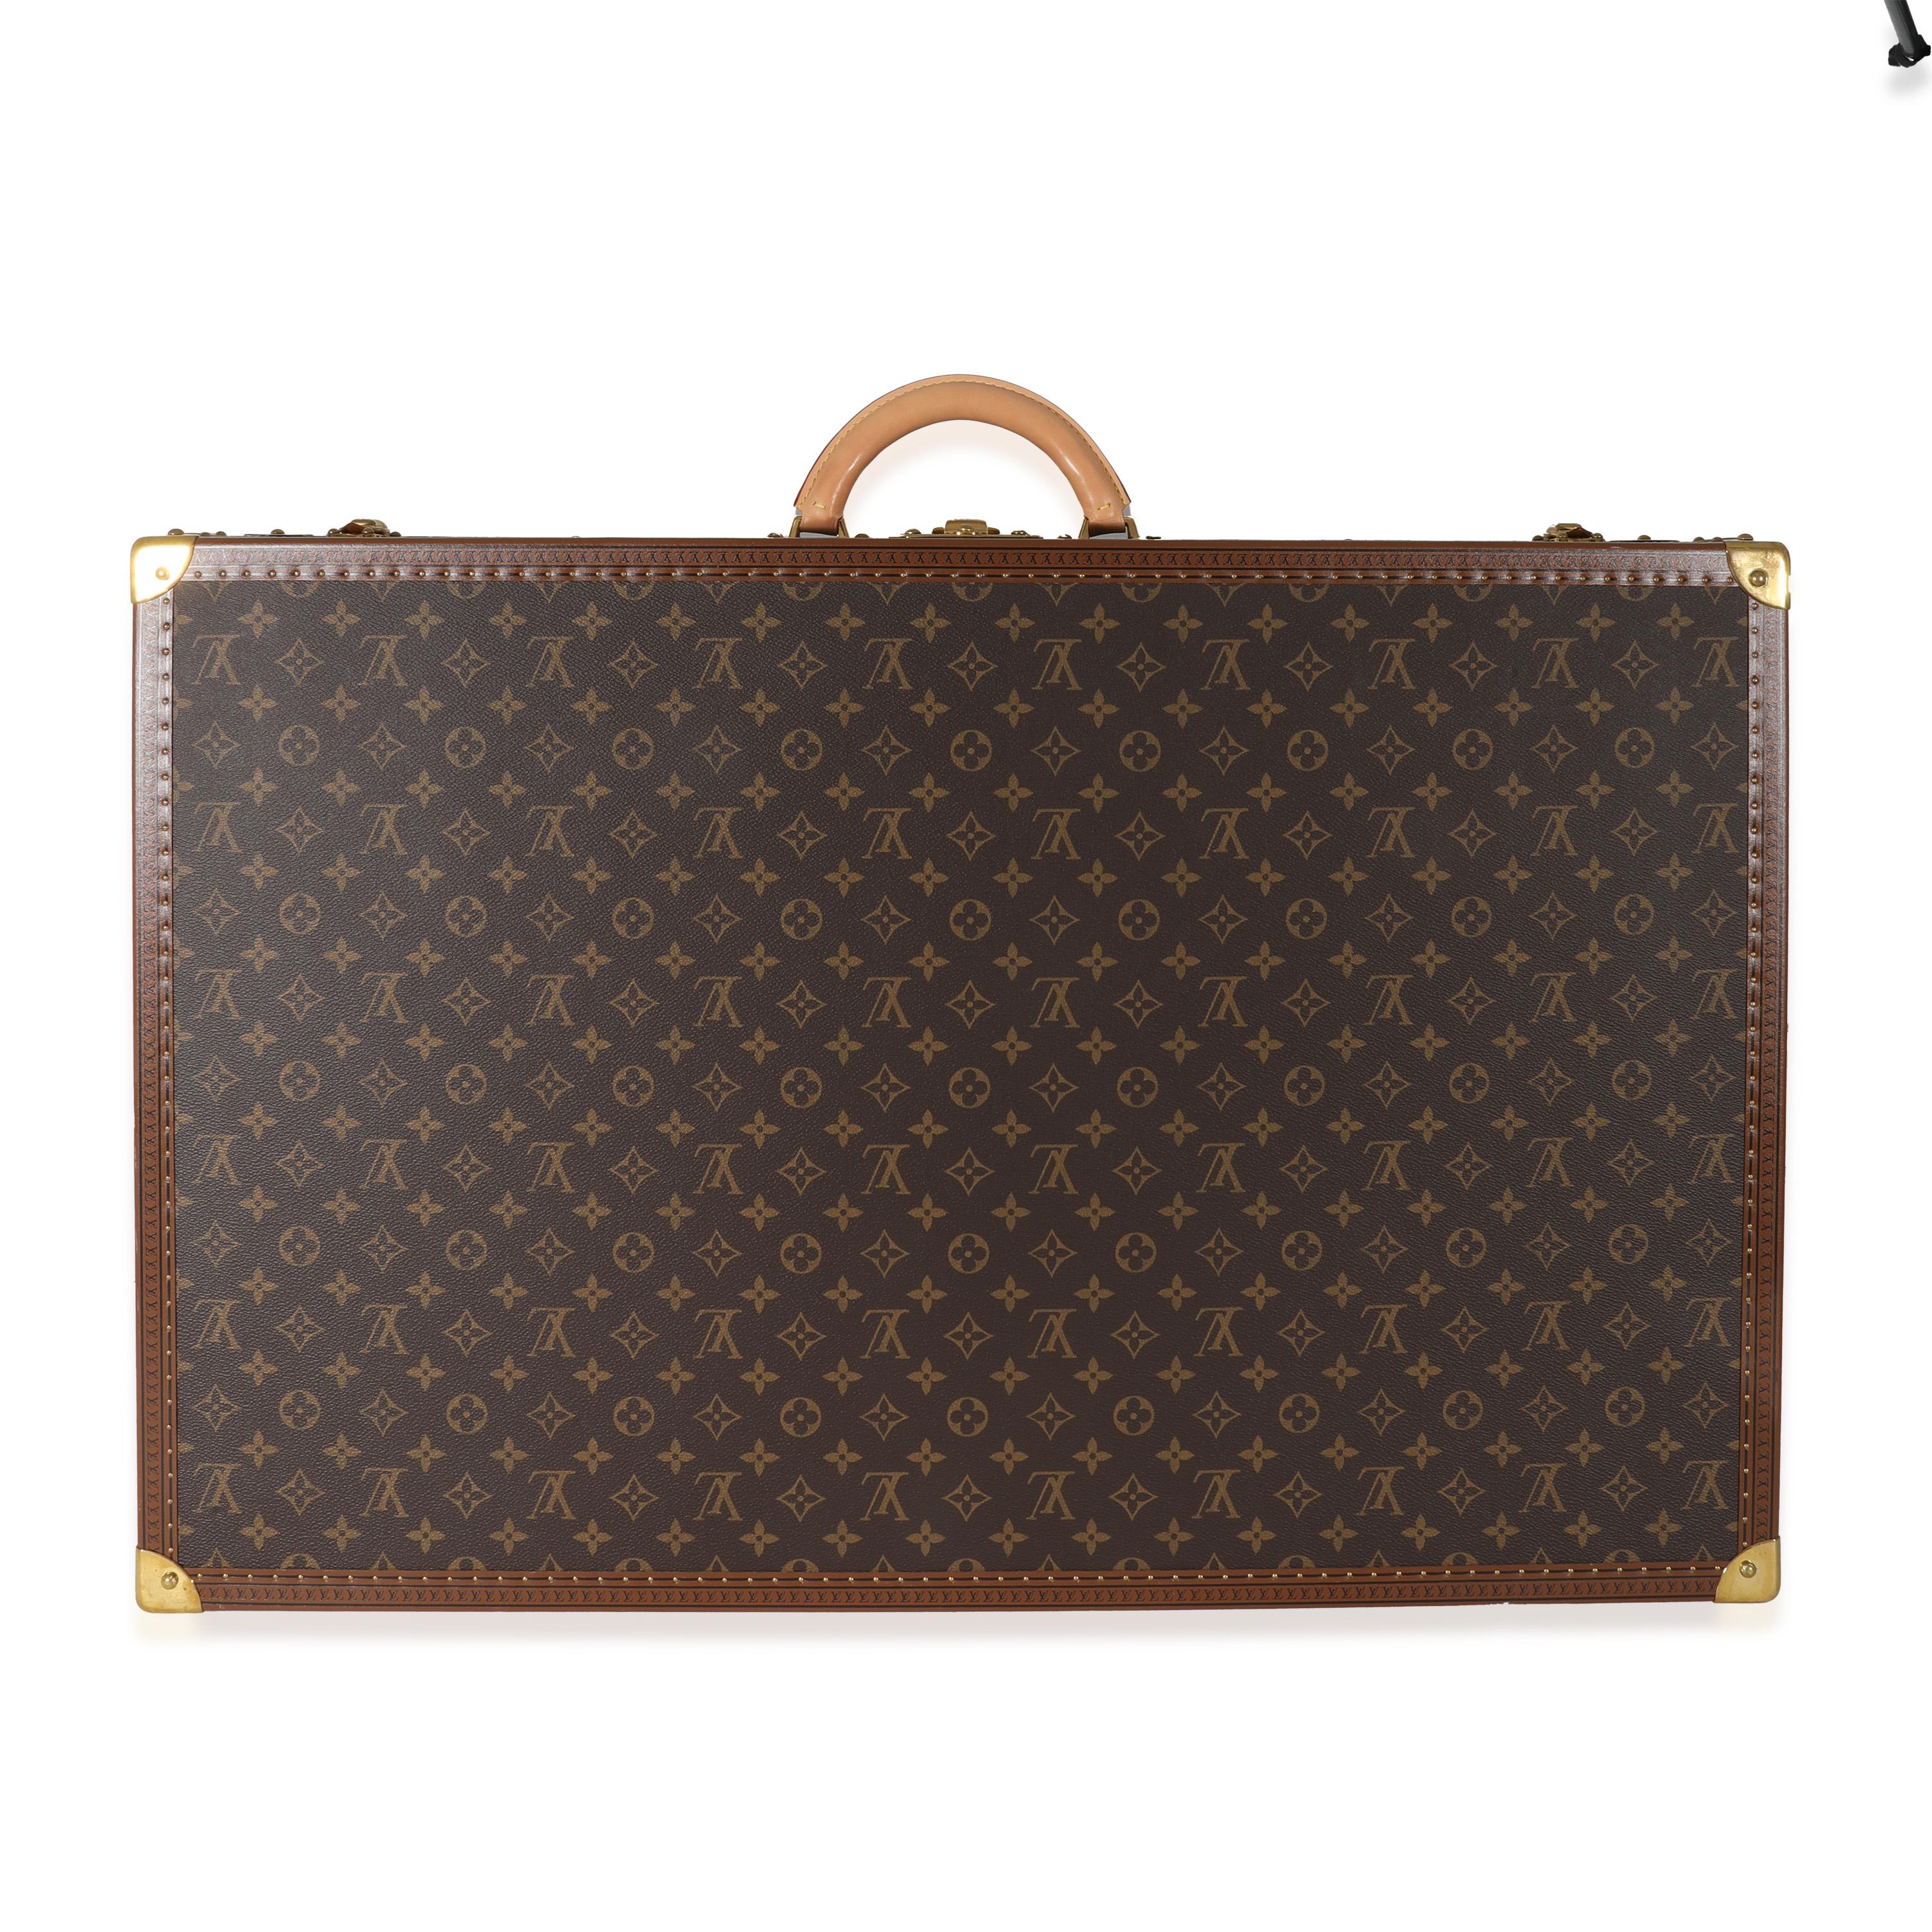 Listing Title: Louis Vuitton Monogram Canvas Bisten 80
SKU: 130939
MSRP: 11500.00
Condition: Pre-owned 
Handbag Condition: Very Good
Condition Comments: Item is in very good condition with minor signs of wear. Odor to interior. Scratching and